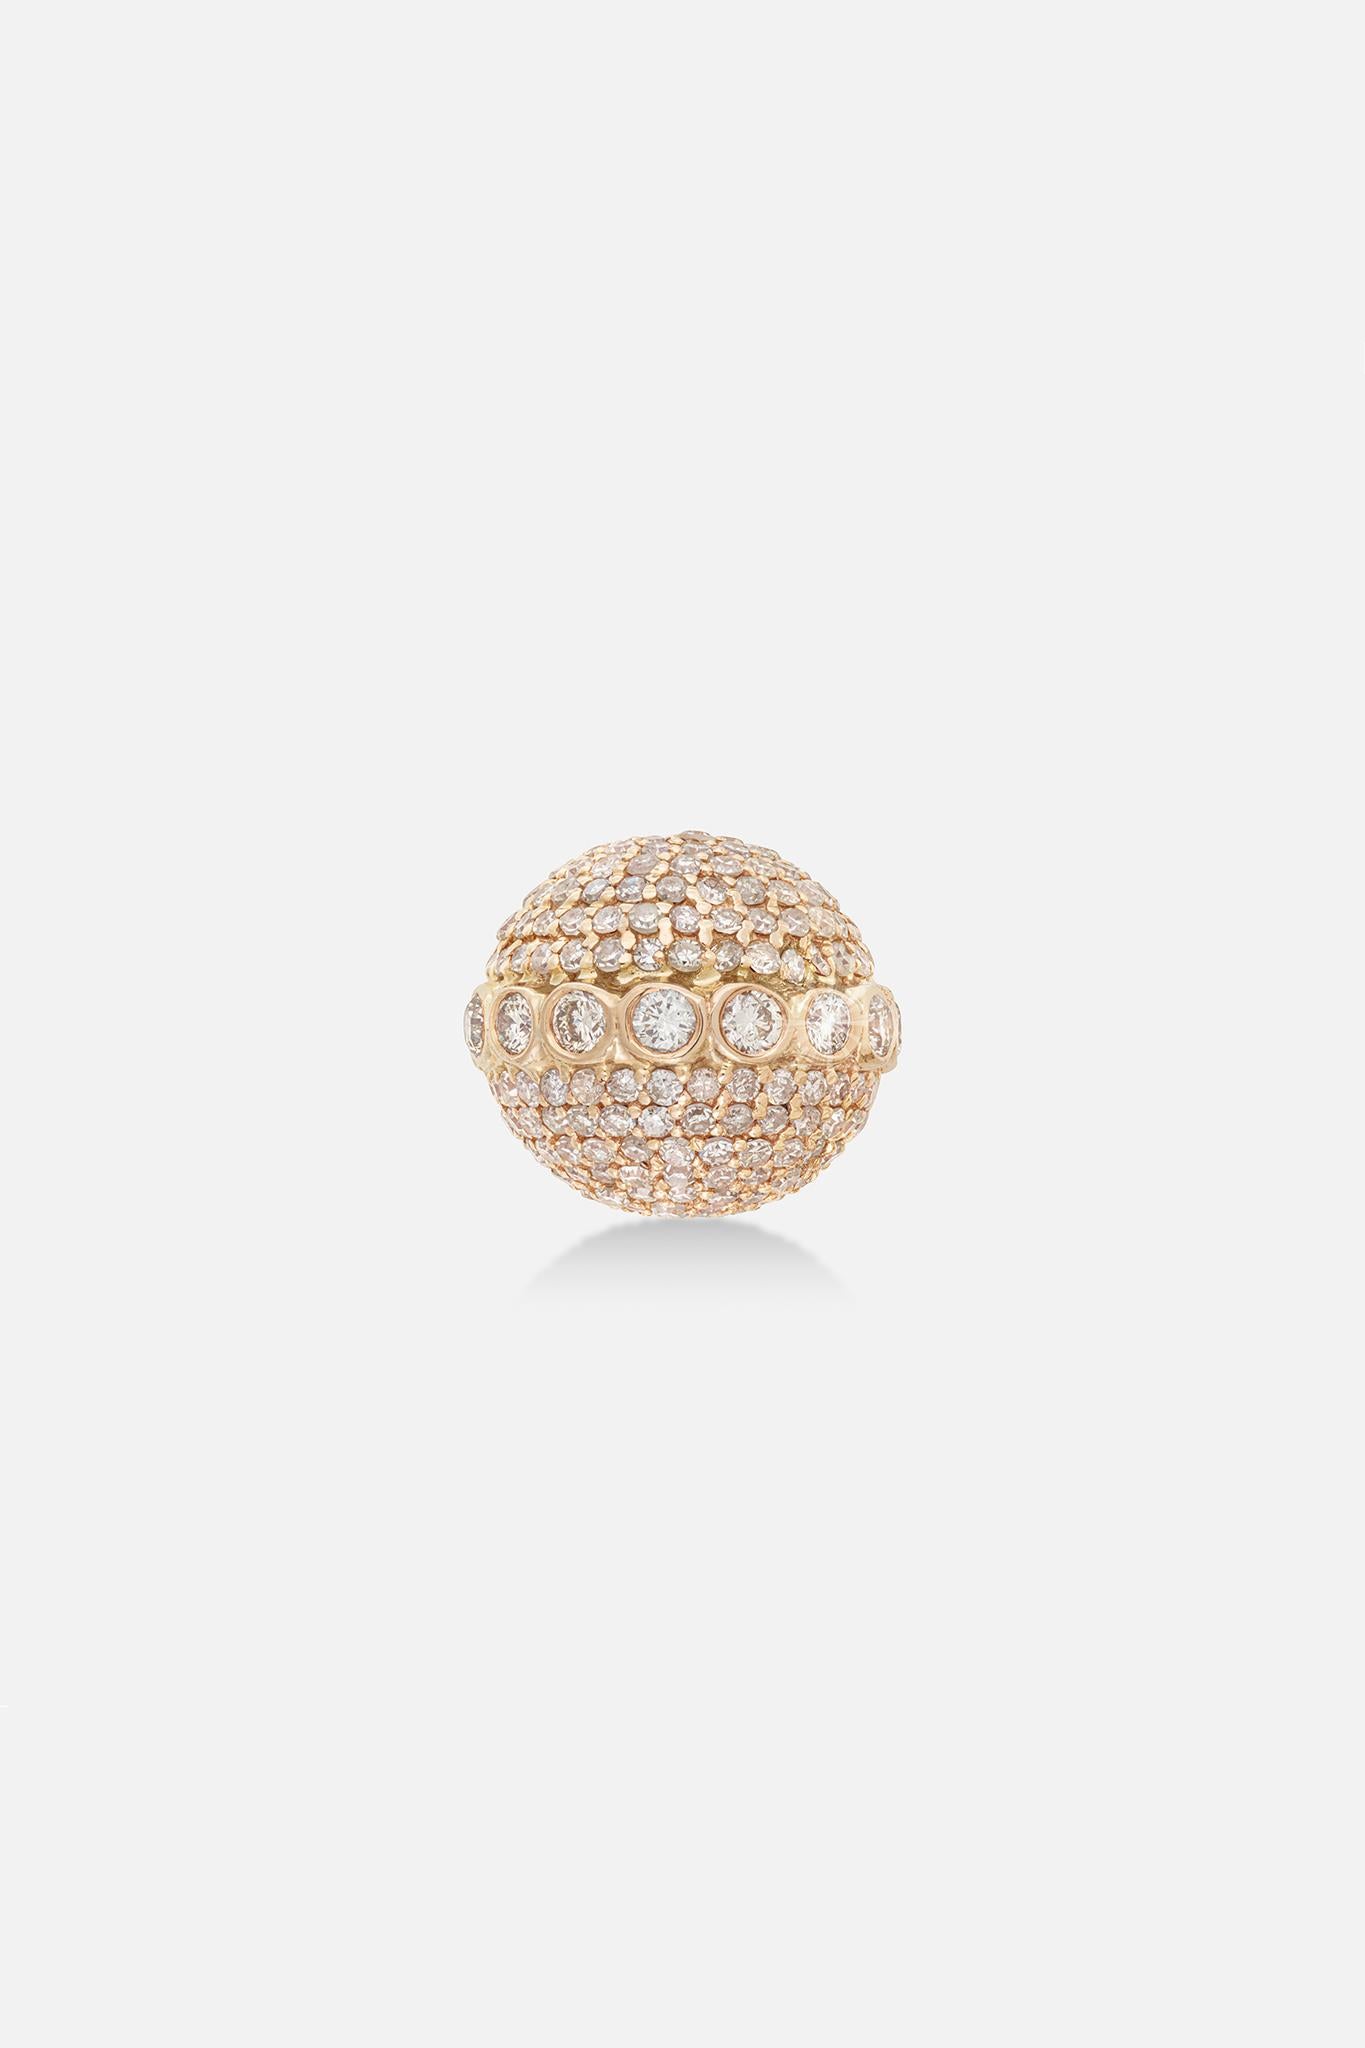 A new take on a classic one size bracelet by representing THEVAULT15's handmade free turning 18-karat gold Signature Infinity Orb. A special Orb encrusted with sparkling diamonds and a centered diamond belt representing infinity. Each bead is